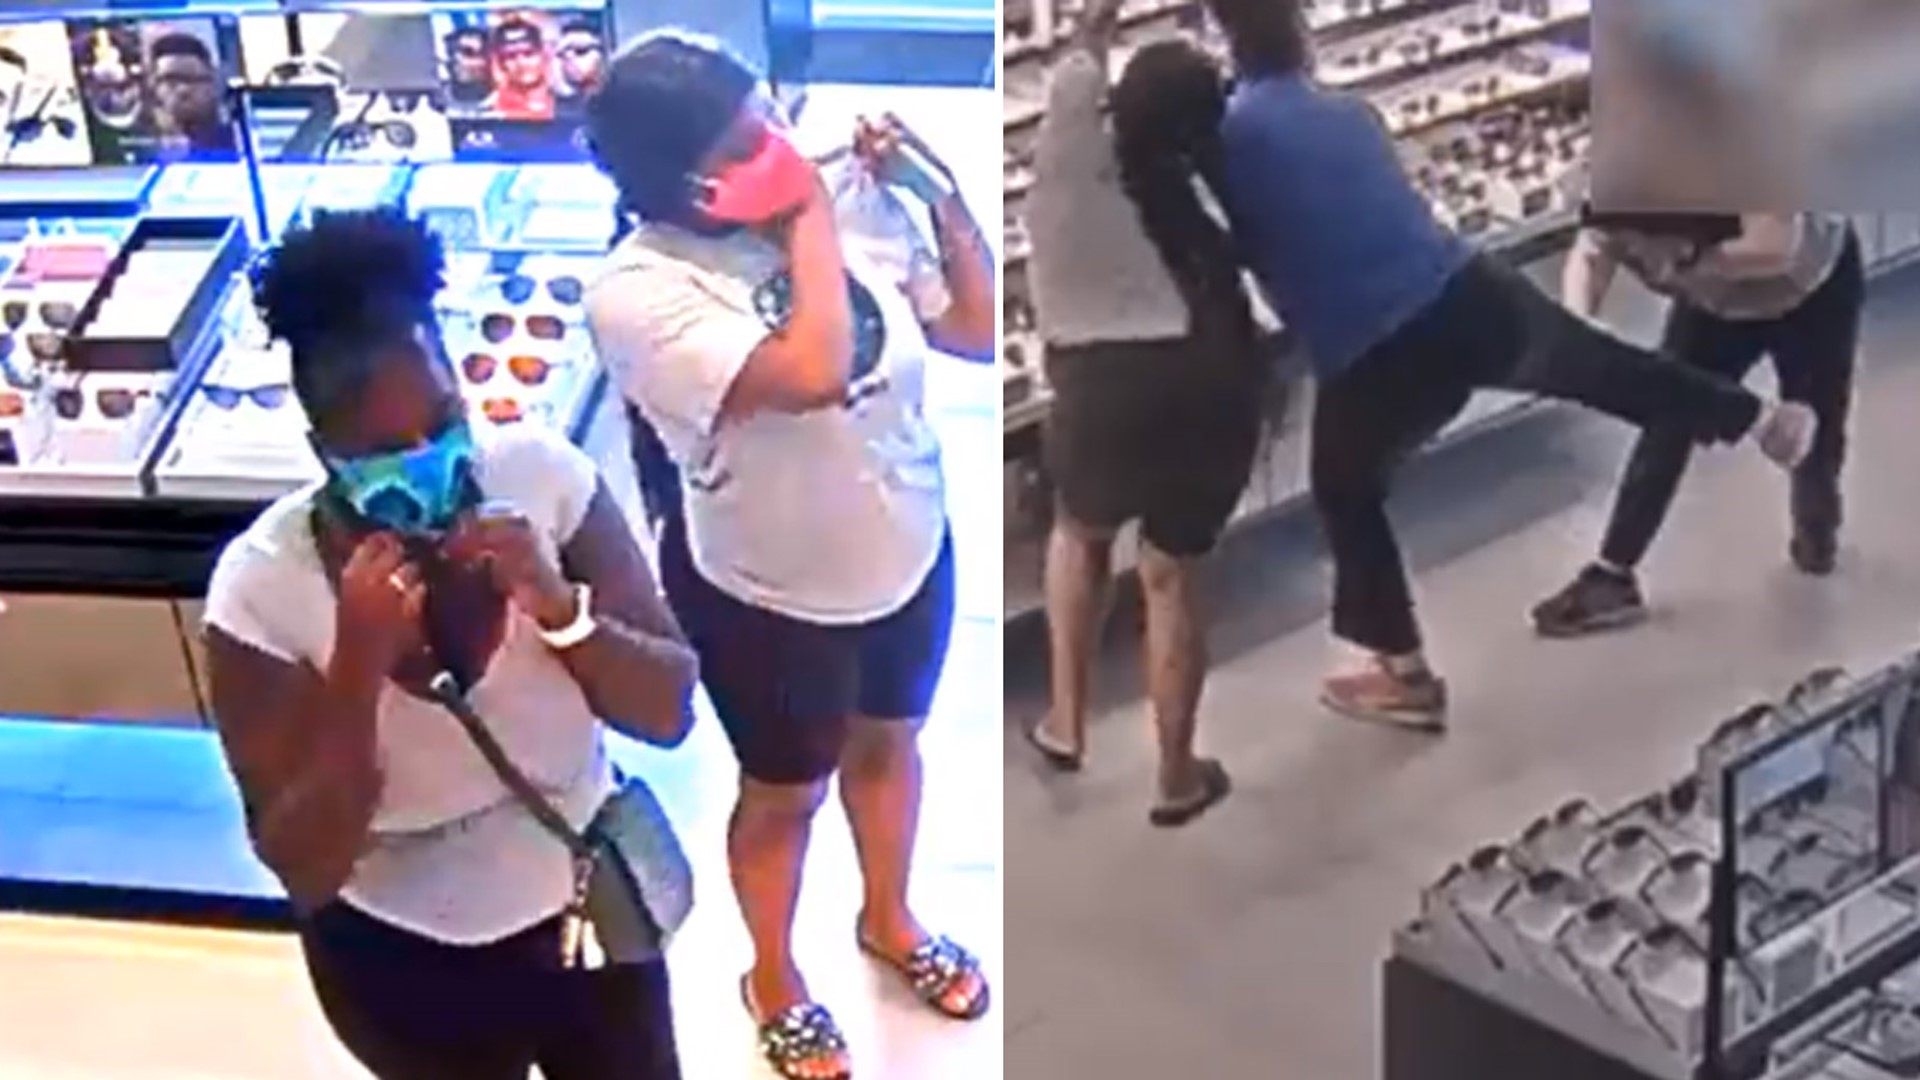 Sugar Land police have released surveillance video of two women they say were caught on camera stealing expensive sunglasses.